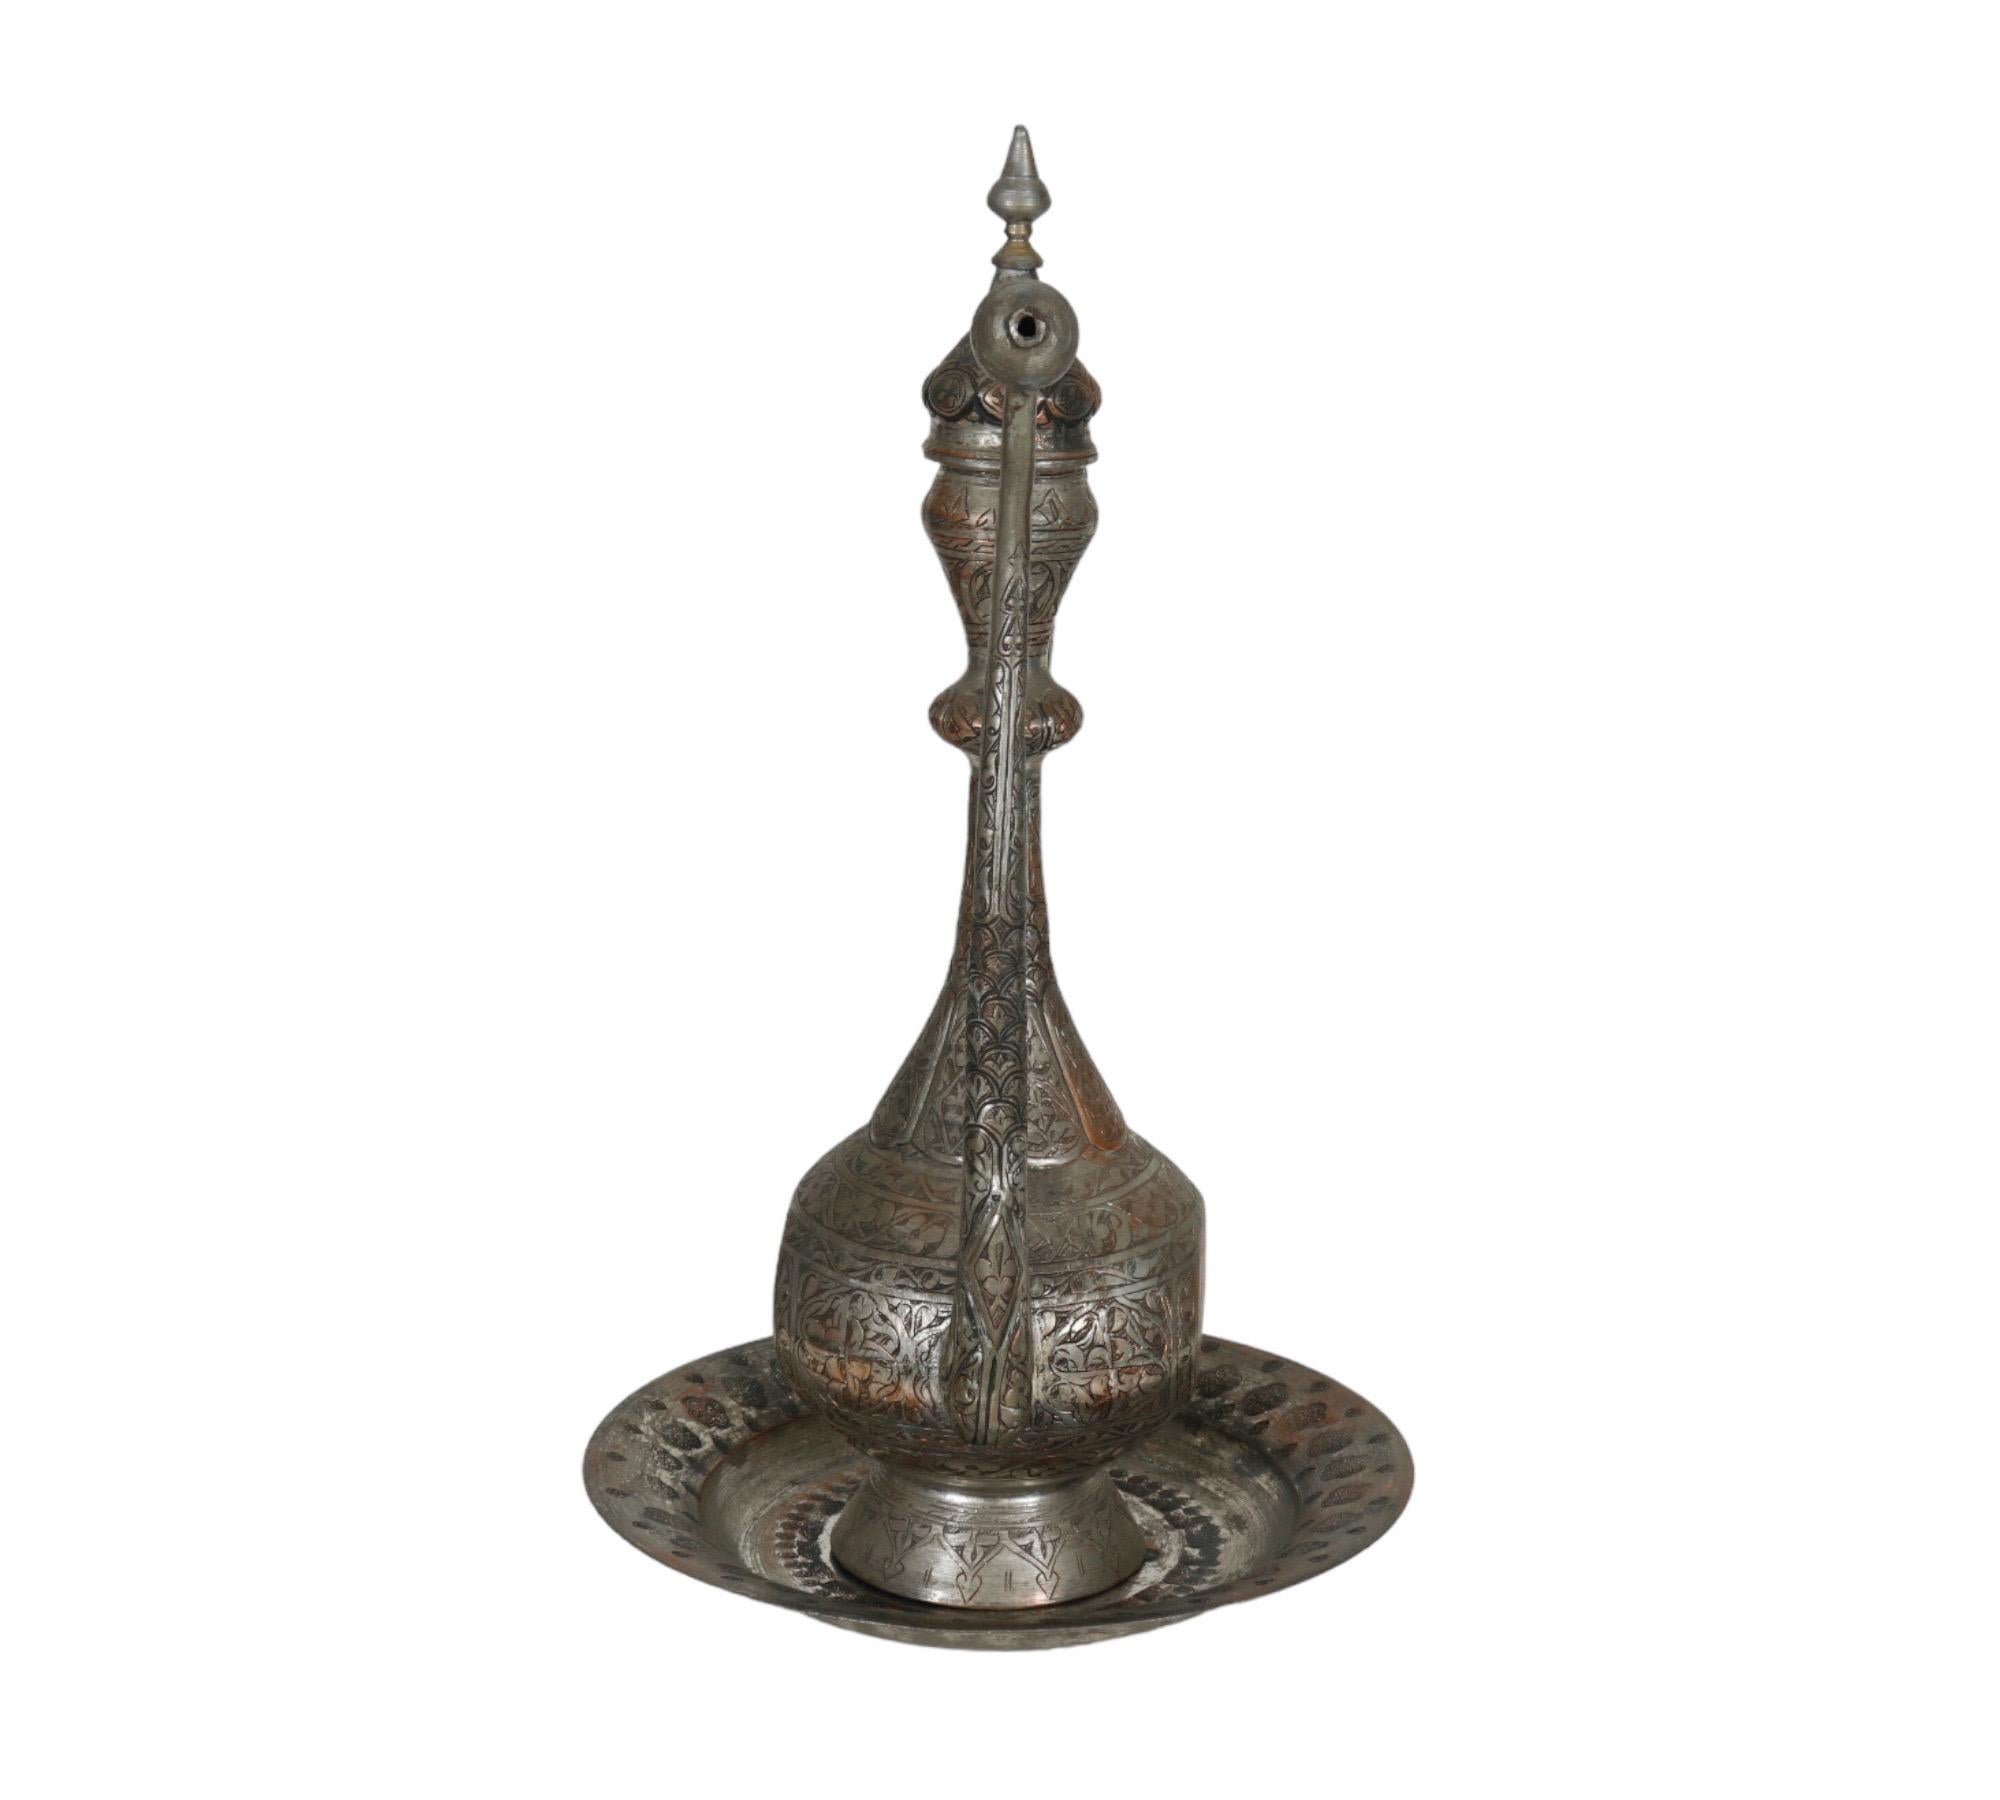 A large Middle Eastern silver plated copper ewer with matching serving plate. Tall with a long spout, neck and handle. Ornately carved throughout with a vine like motif.
